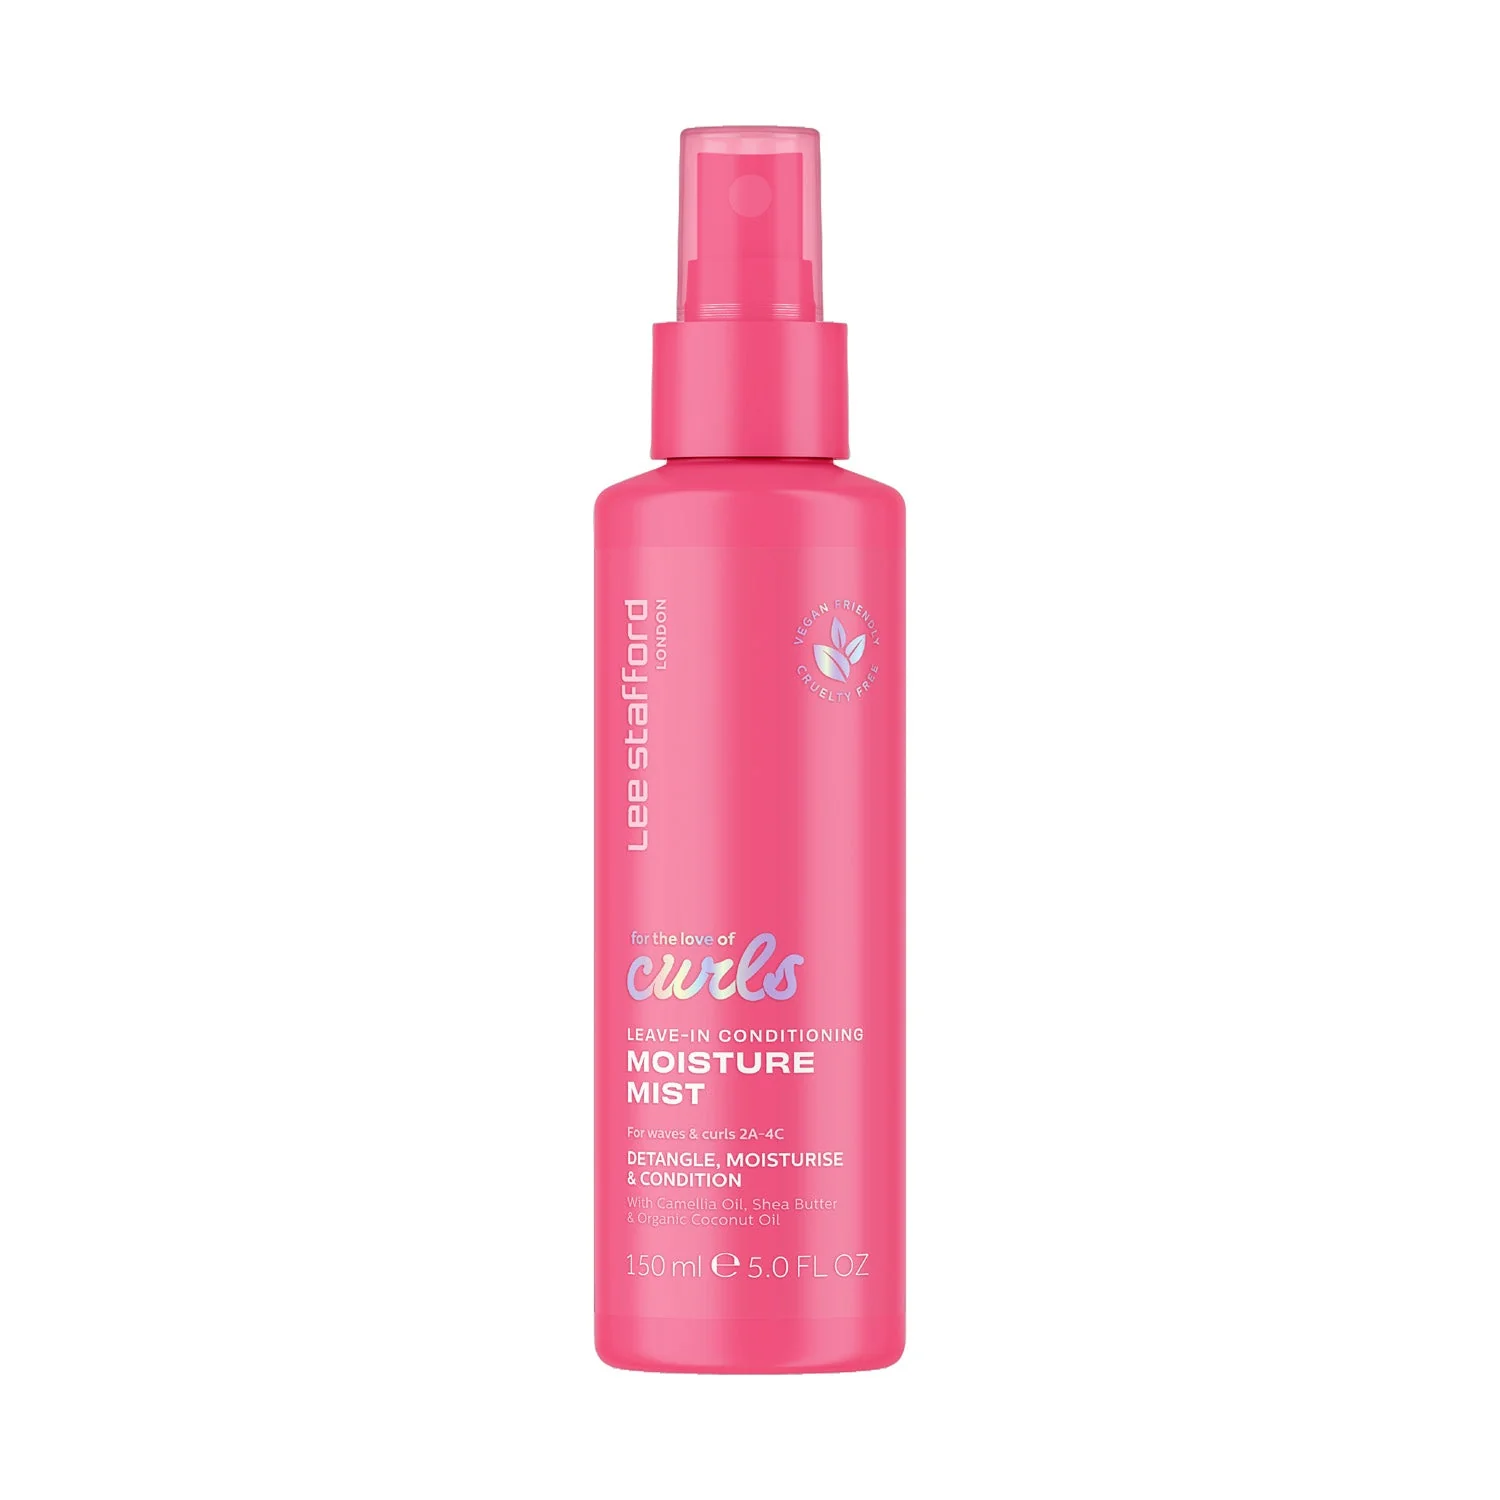 Lee Stafford For The Love Of Curls Leave-in Conditioning Moisture Mist